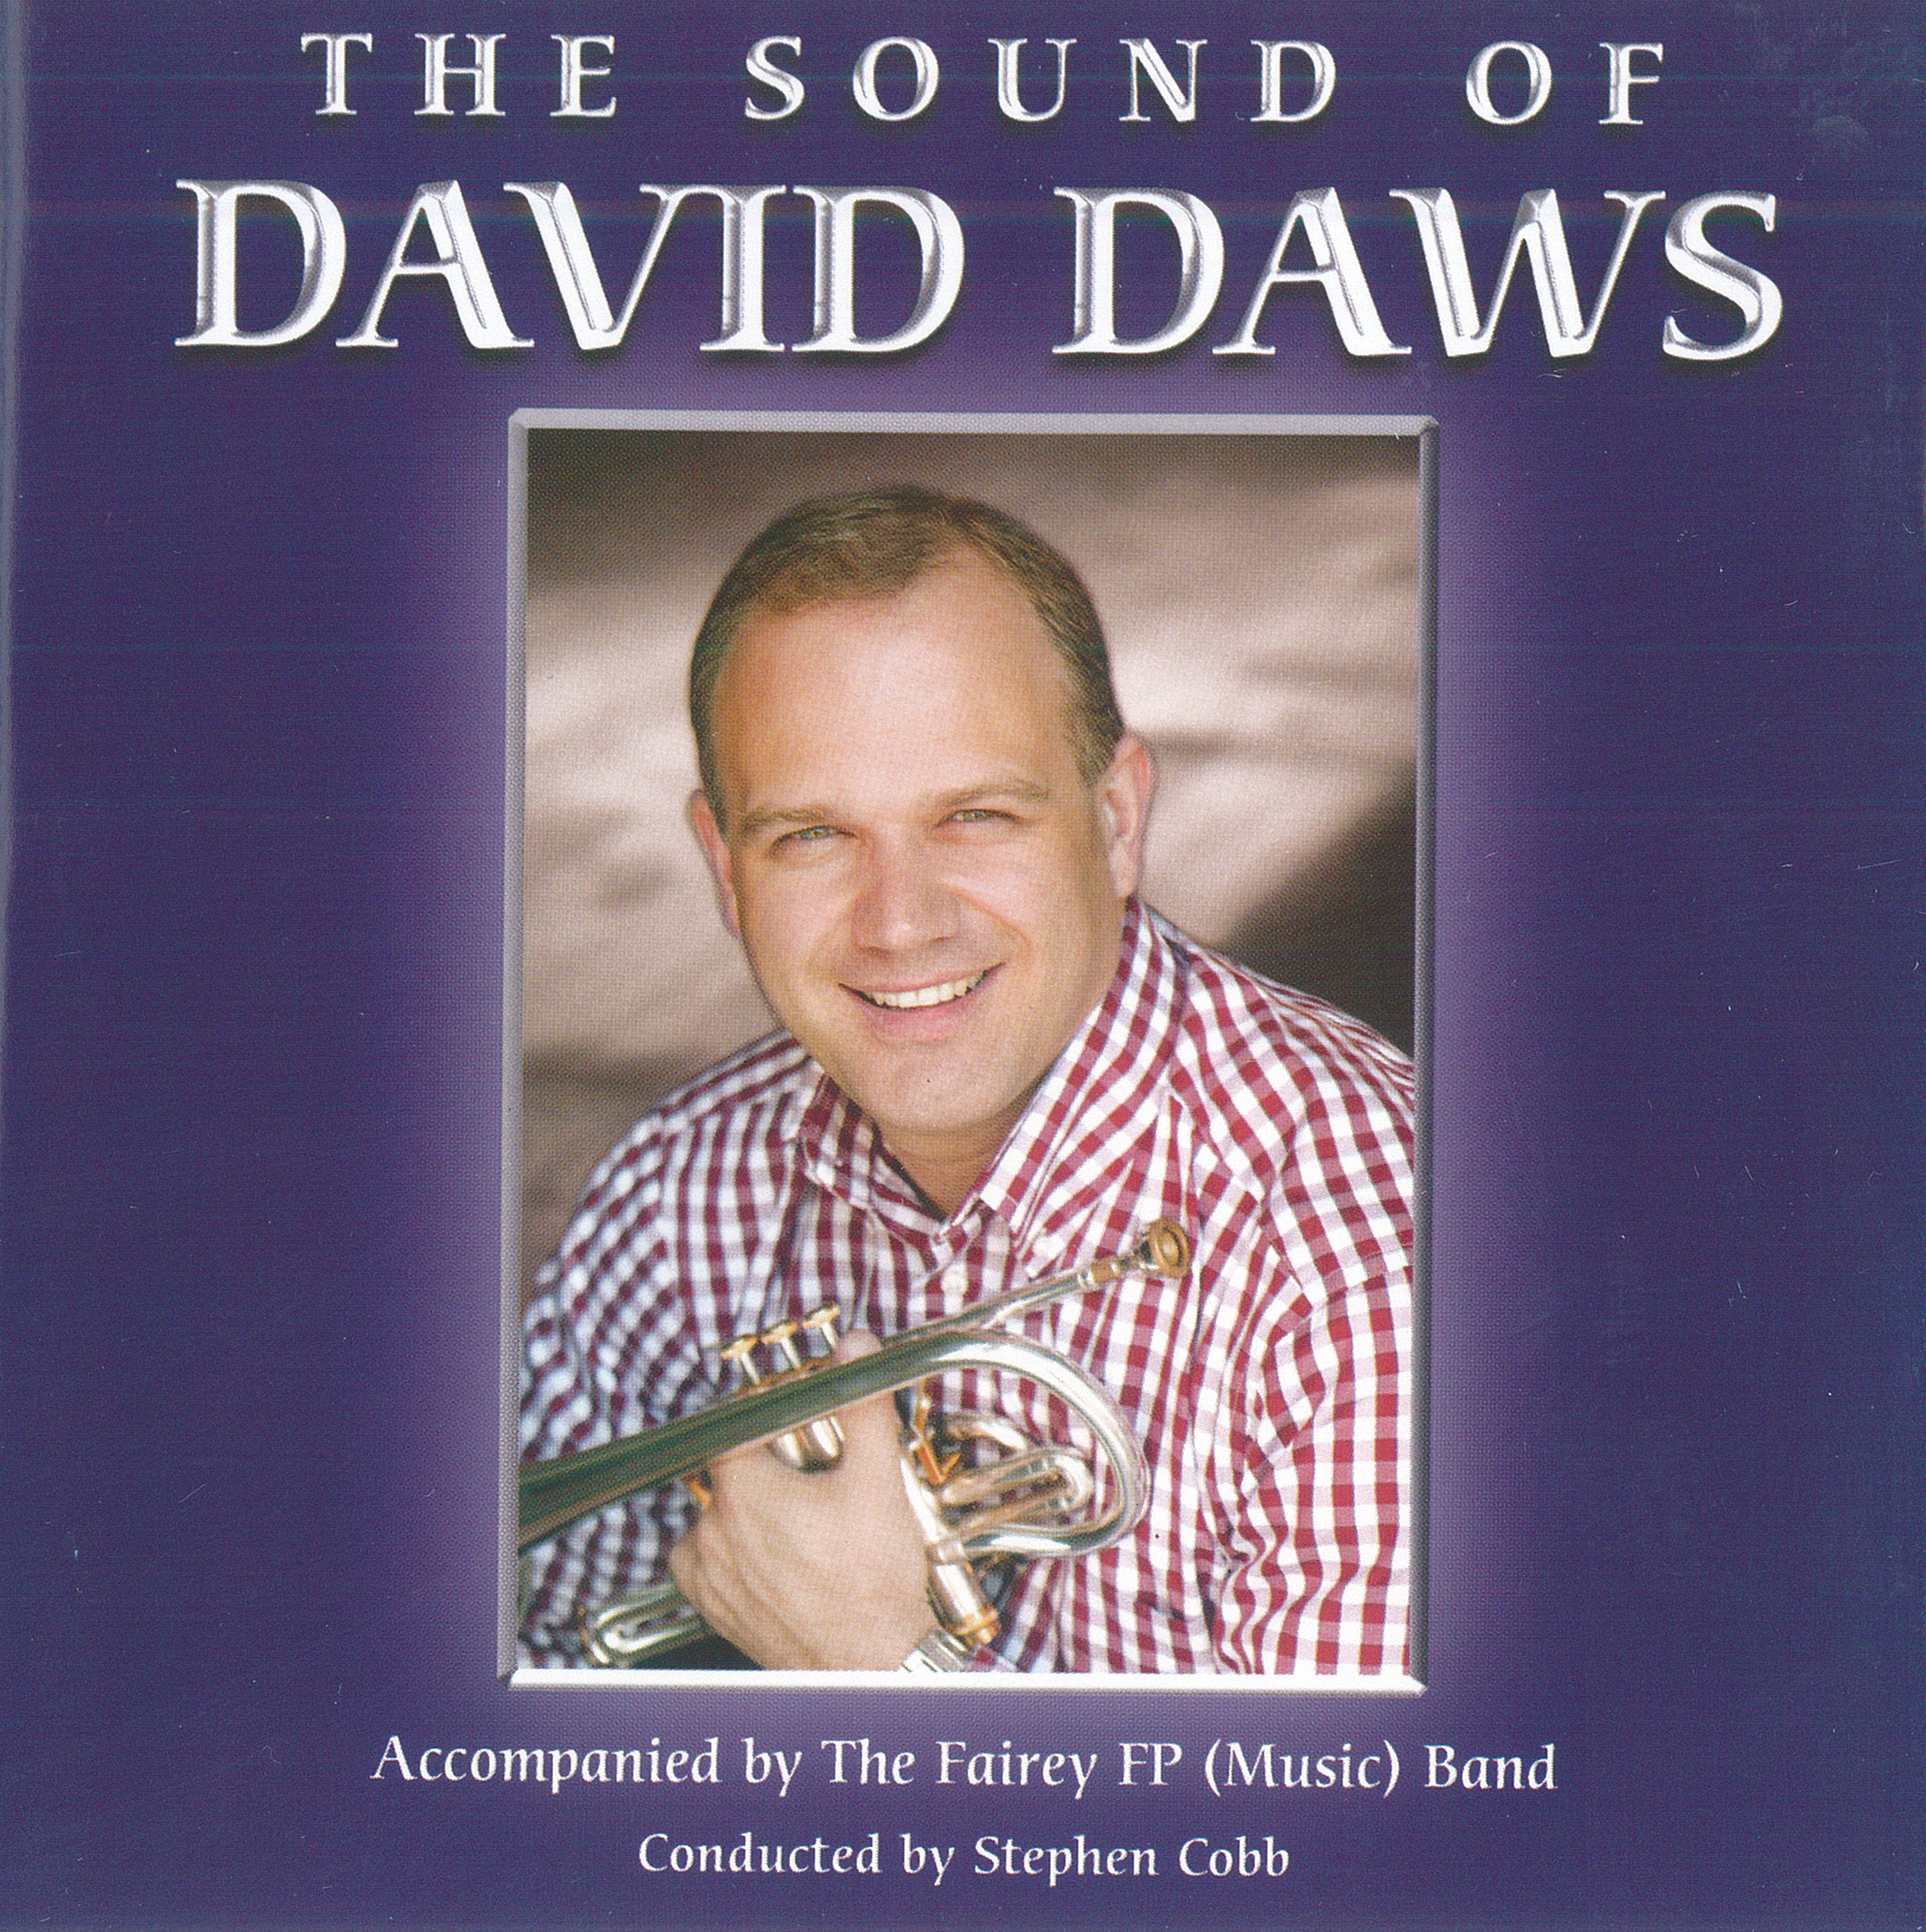 The Sound of David Daws - Download